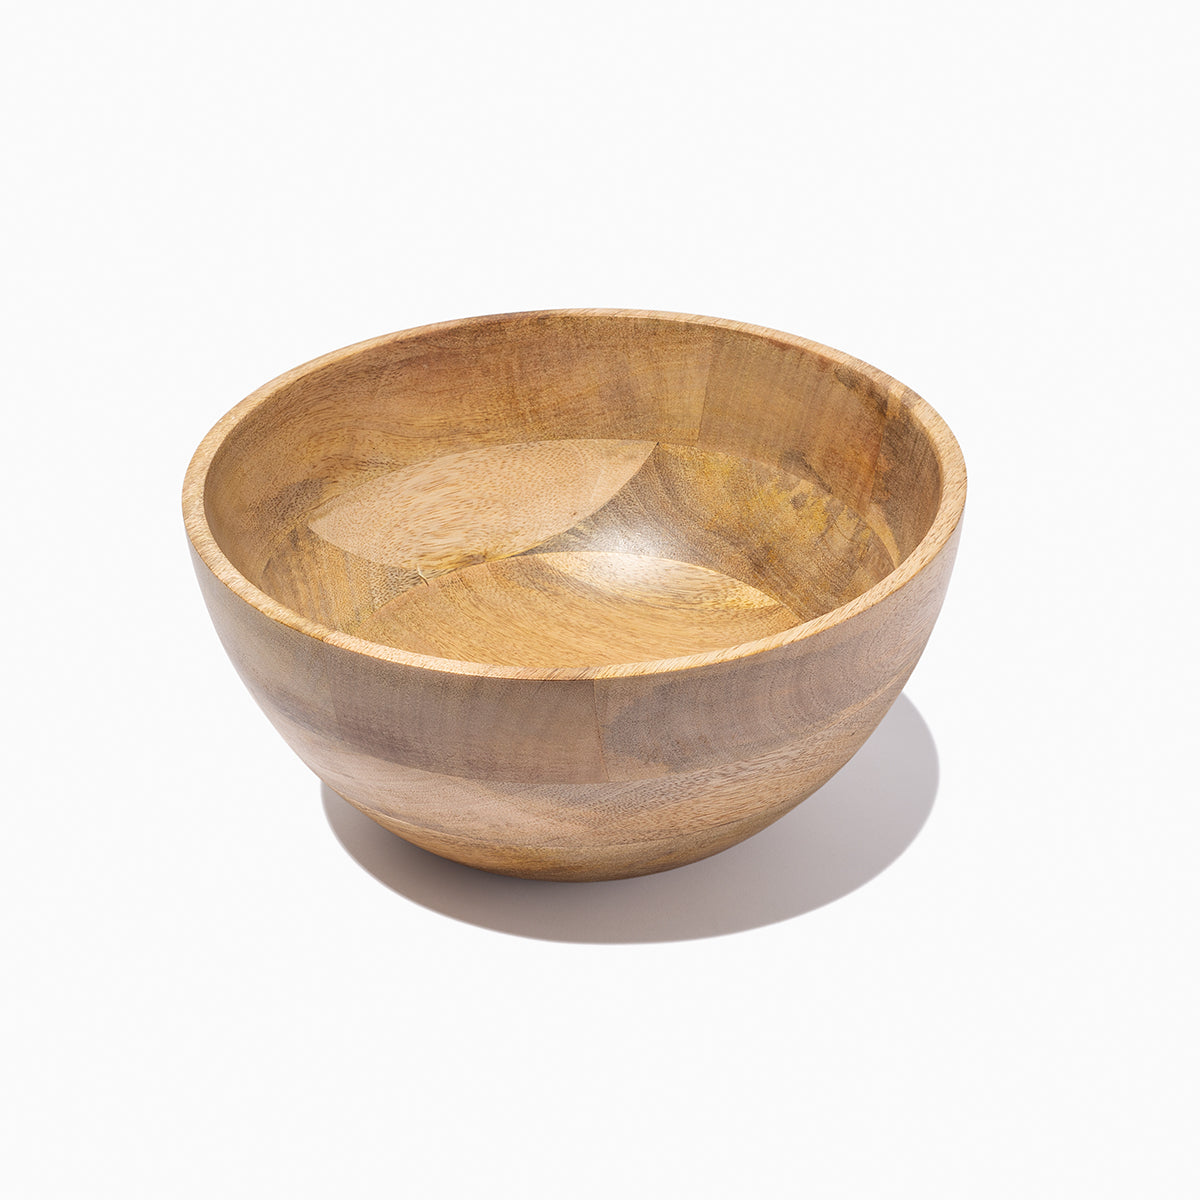 Wooden Bowl | Product Detail Image | Uncommon James Home